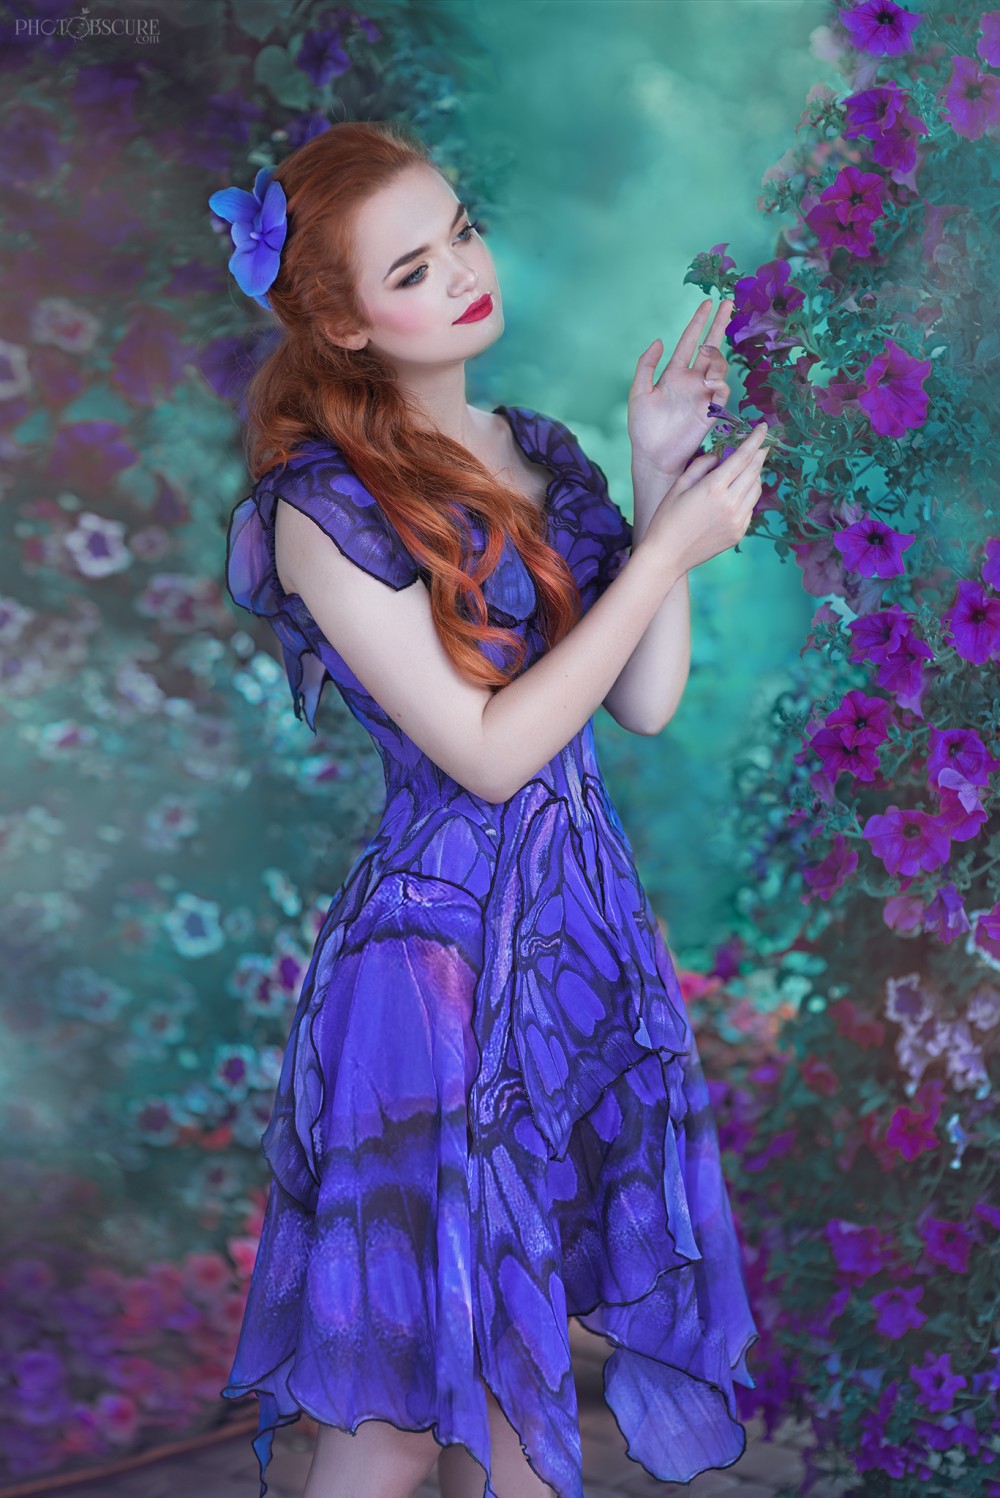 The Absolutely Stunning Dresses And Corsets Inspired By Butterfly Wings Of Bibian Blue 13